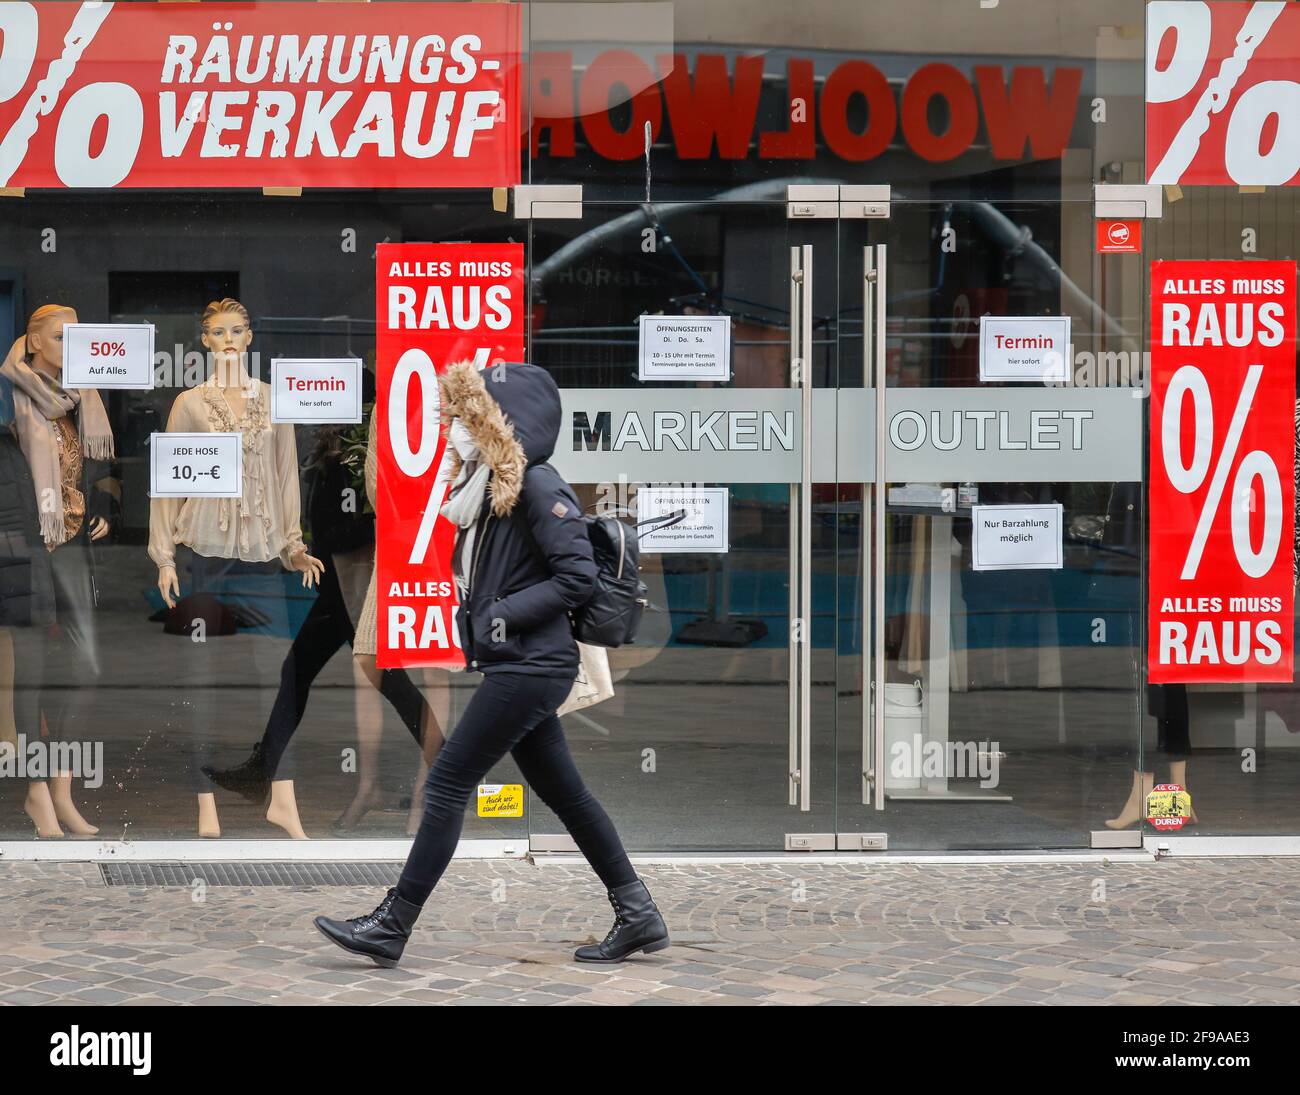 Düren, North Rhine-Westphalia, Germany - Düren city center in times of the corona crisis during the second lockdown, most shops are closed, few passers-by in the pedestrian zone, a fashion store offers Sofort Click & Meet, register immediately and shop immediately. Stock Photo